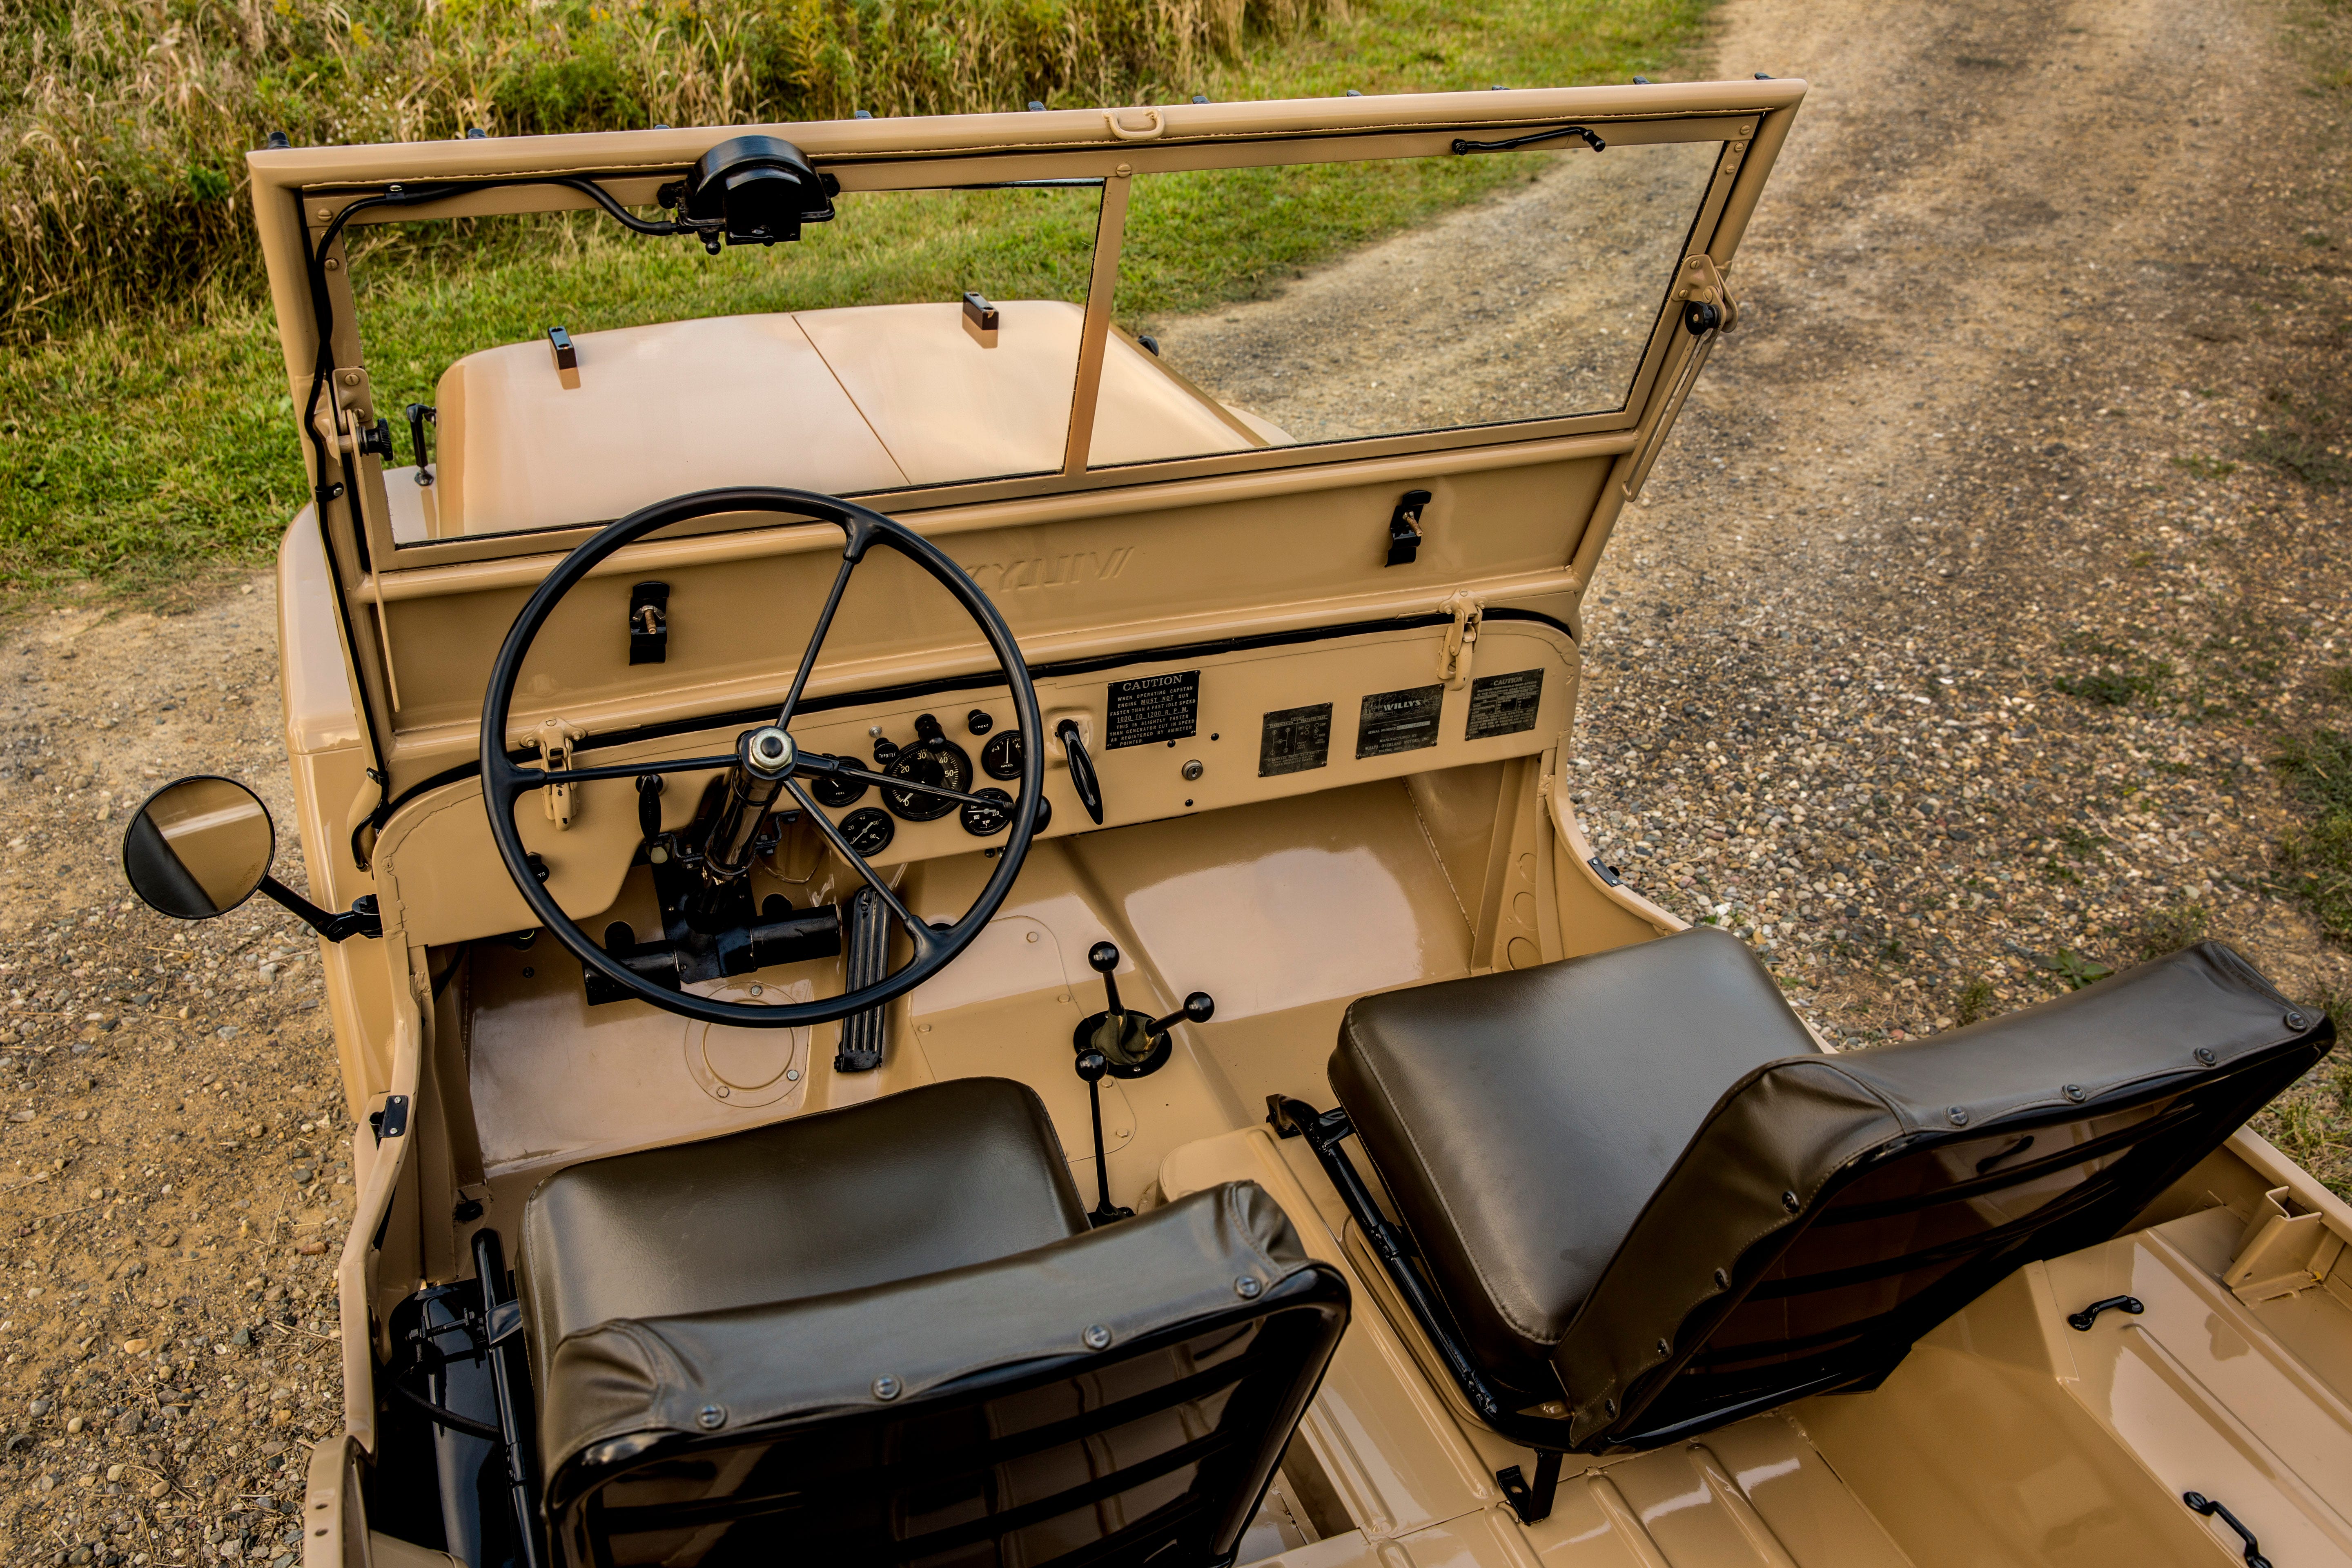 1945-1949 Jeep CJ-2A: The first civilian Jeep vehicle, the CJ-2A, was produced in 1945. It came with a tailgate, side-mounted spare tire, larger headlights, an external fuel cap and many more items that its military predecessors did not include. Several CJ-2A features – such as a 134-cubic-inch I-4 engine, a T-90A transmission, Spicer 18 transfer case and a full-floating Dana 25 front and Dana 23-2 rear axle – were found on numerous Jeep vehicles in future years. The CJ-2A was produced for four years.